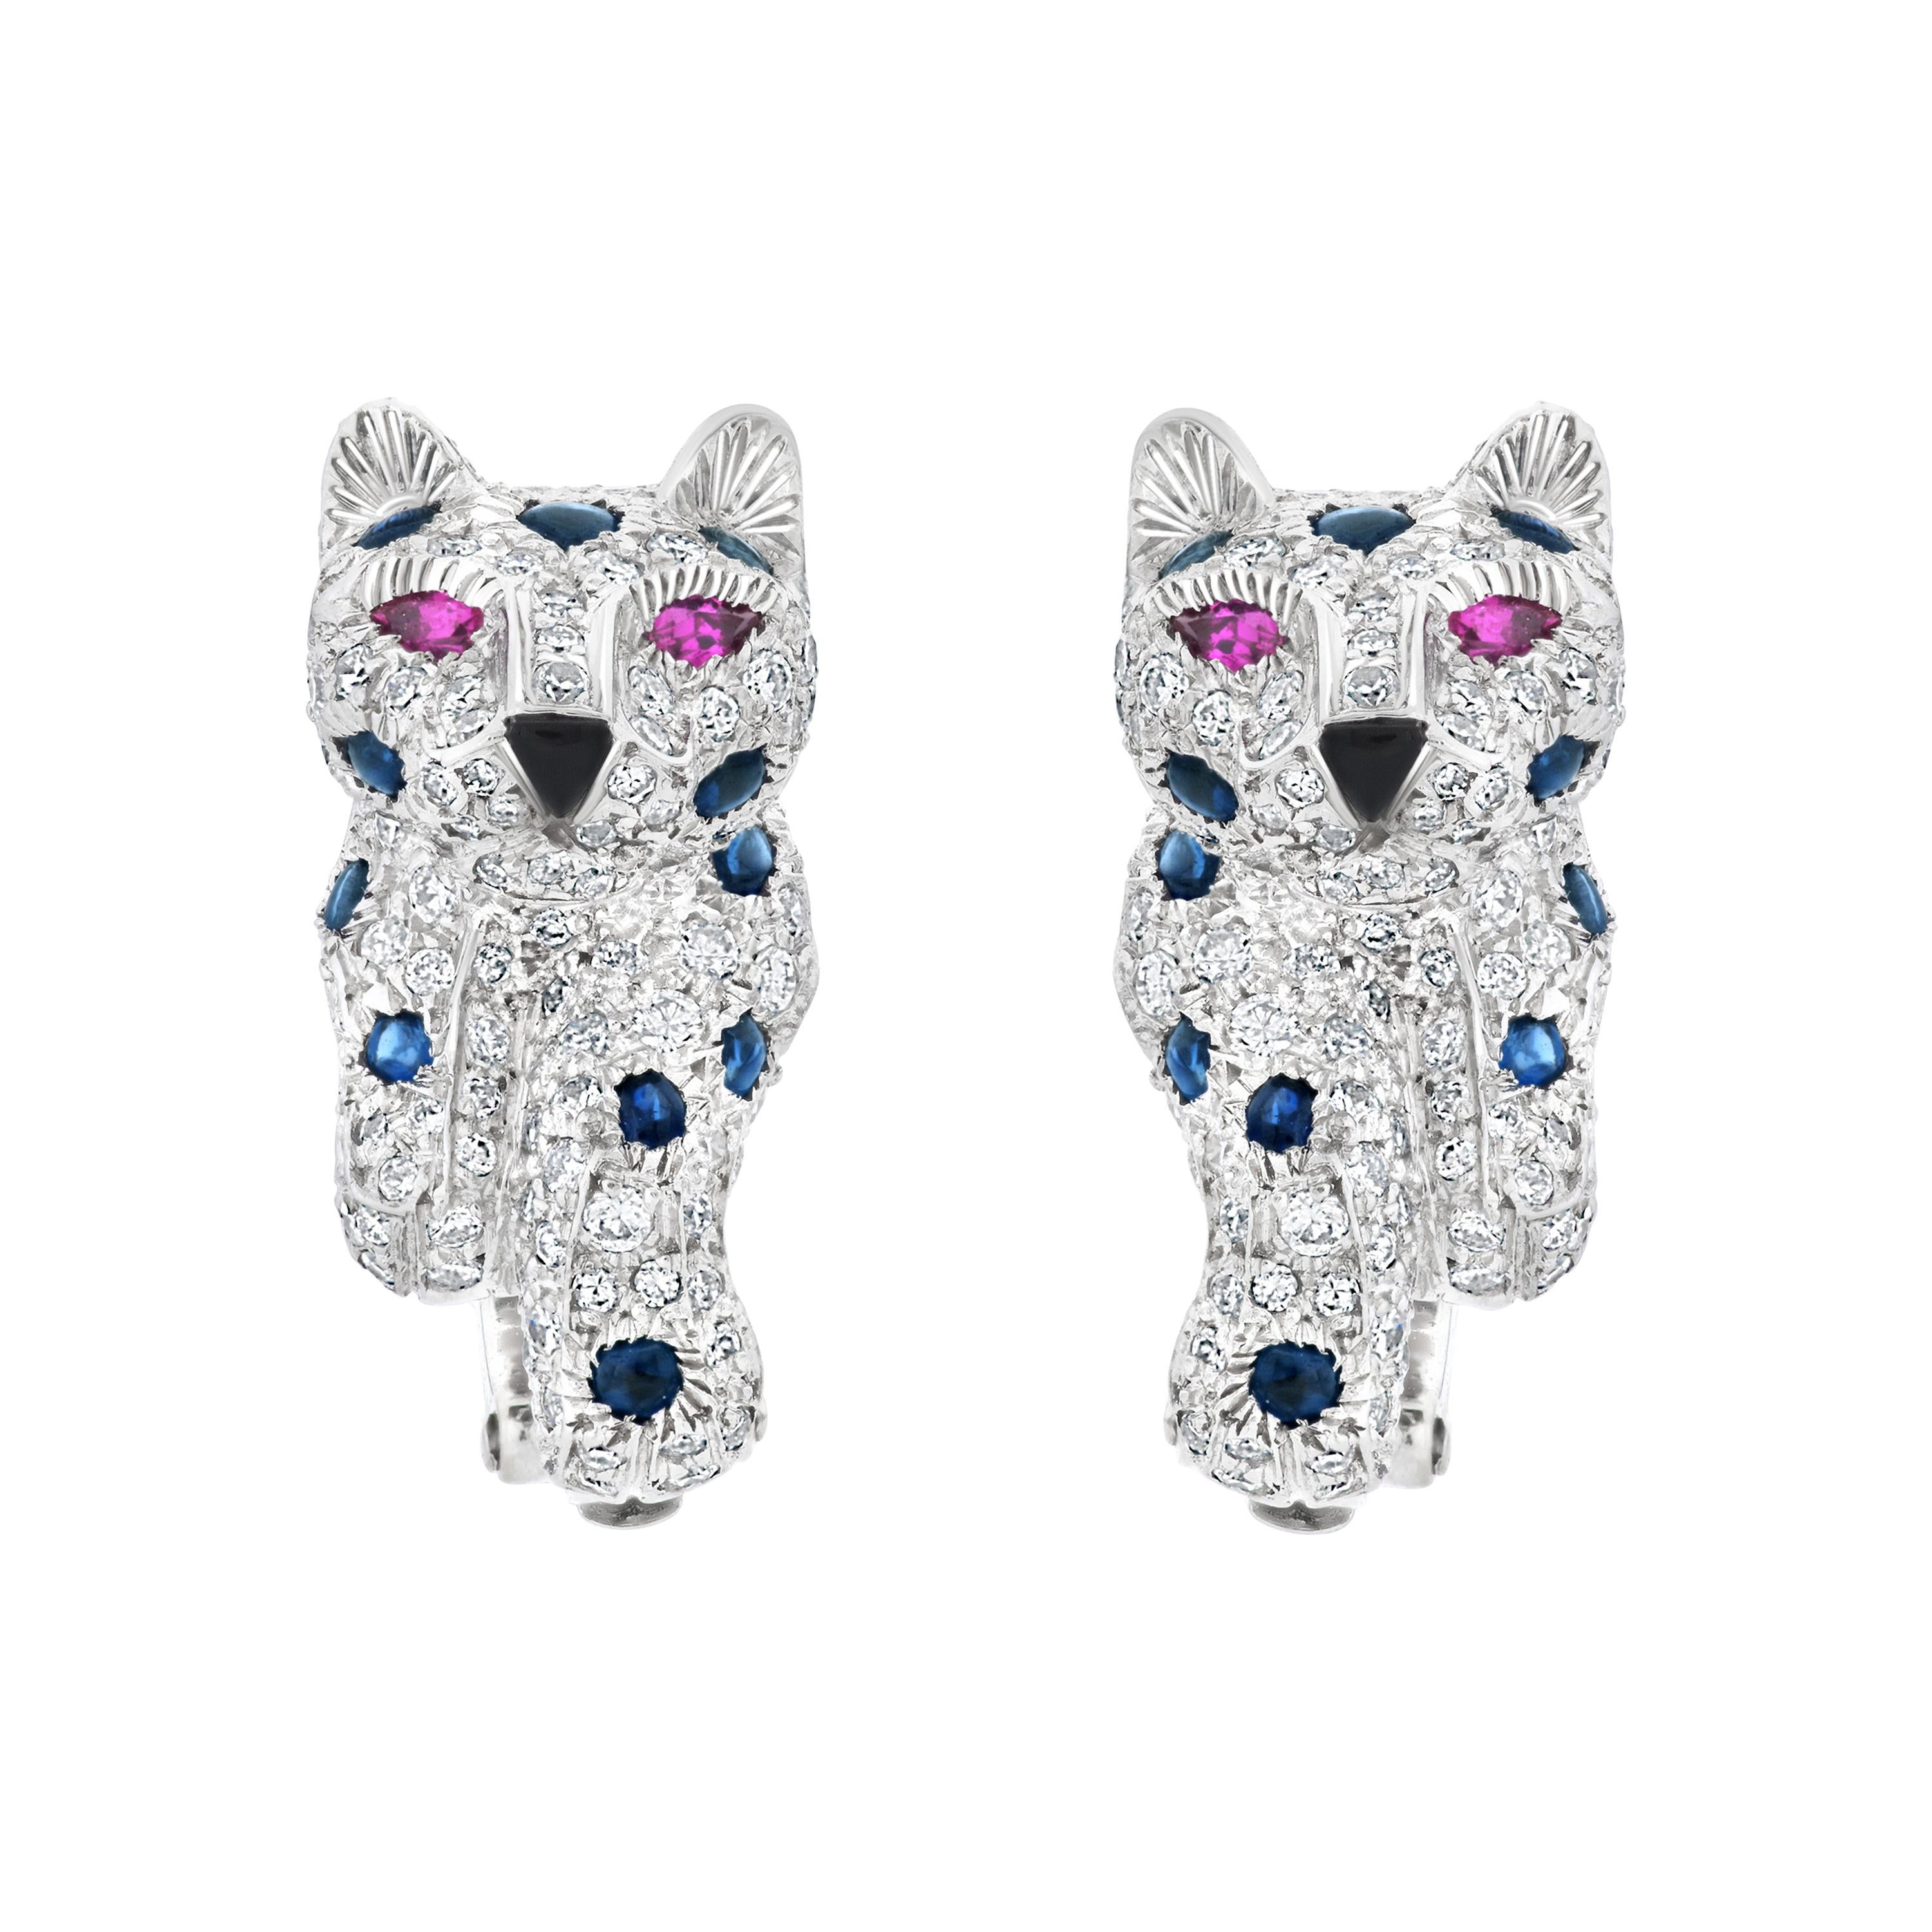 Panthere de Cartier Diamond, Sapphire, and Ruby Earrings in Platinum